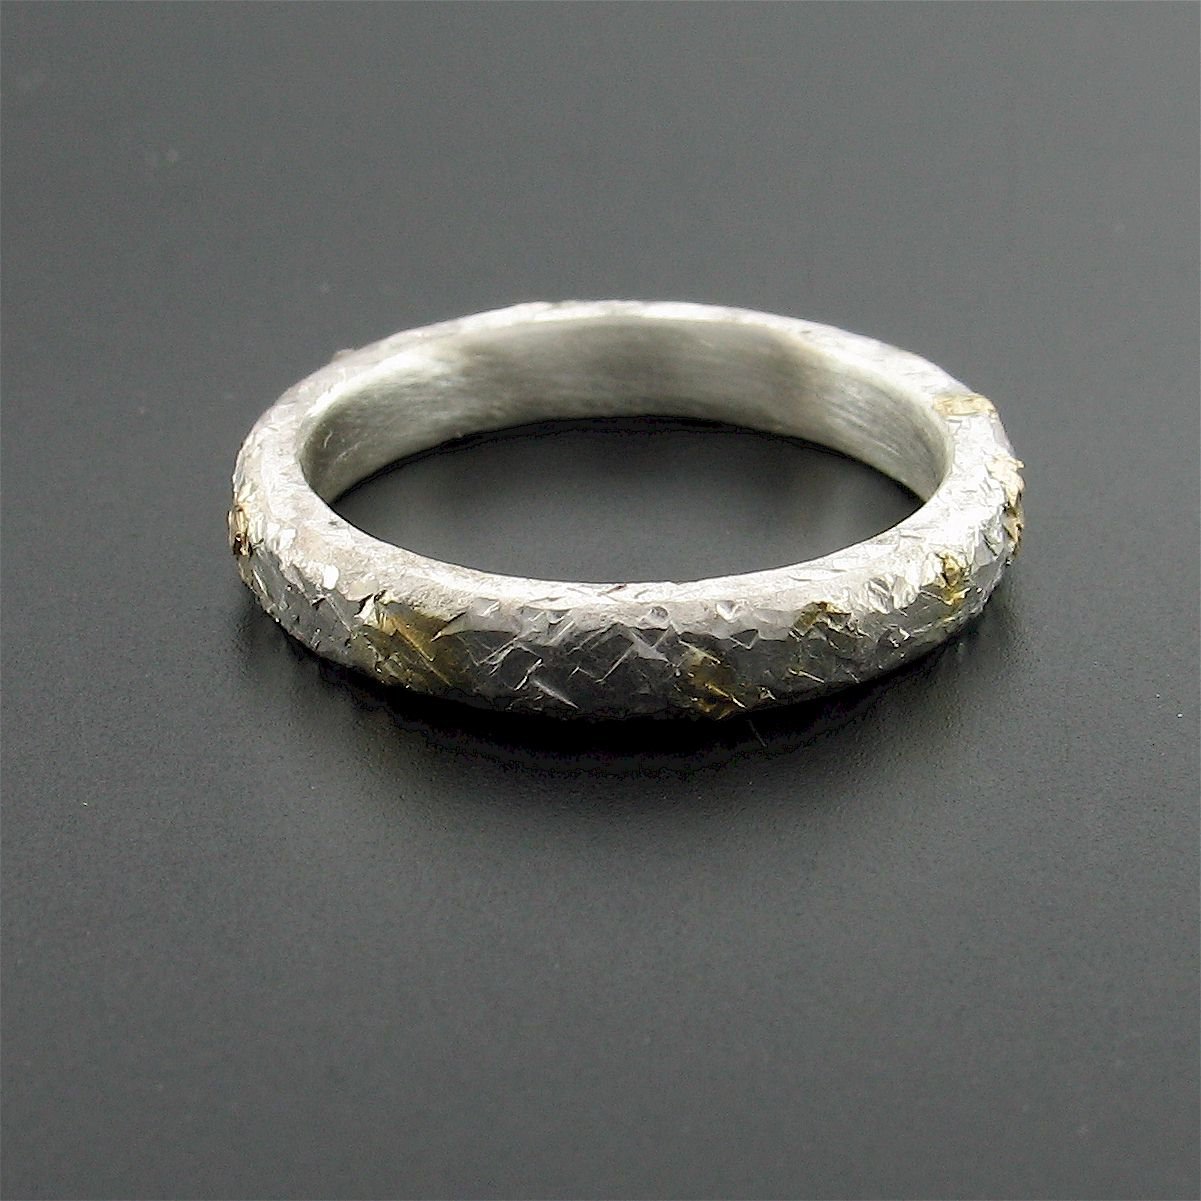 Silver and gold hammered thin wedding ring, Morning View design. - Cumbrian Designs